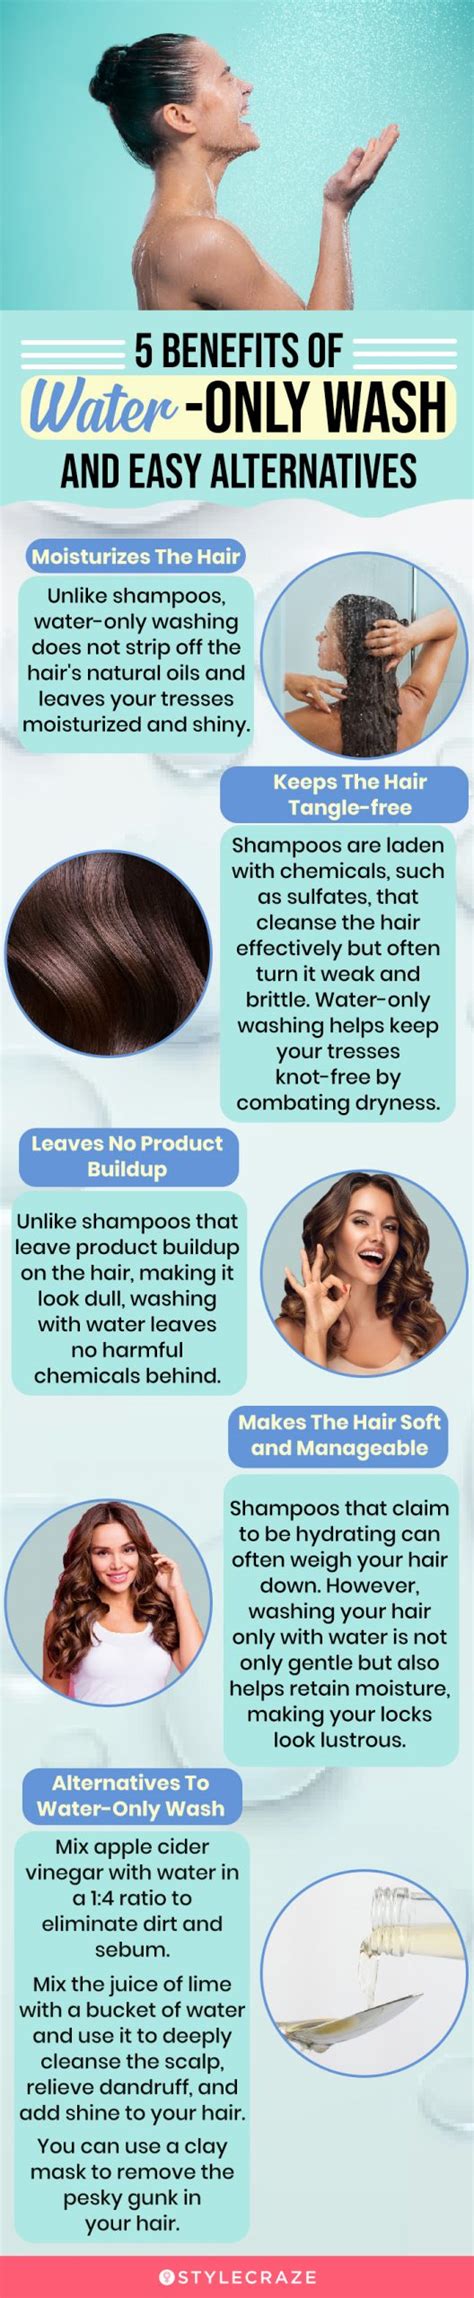 Share Washing Hair Everyday Without Shampoo Super Hot In Eteachers